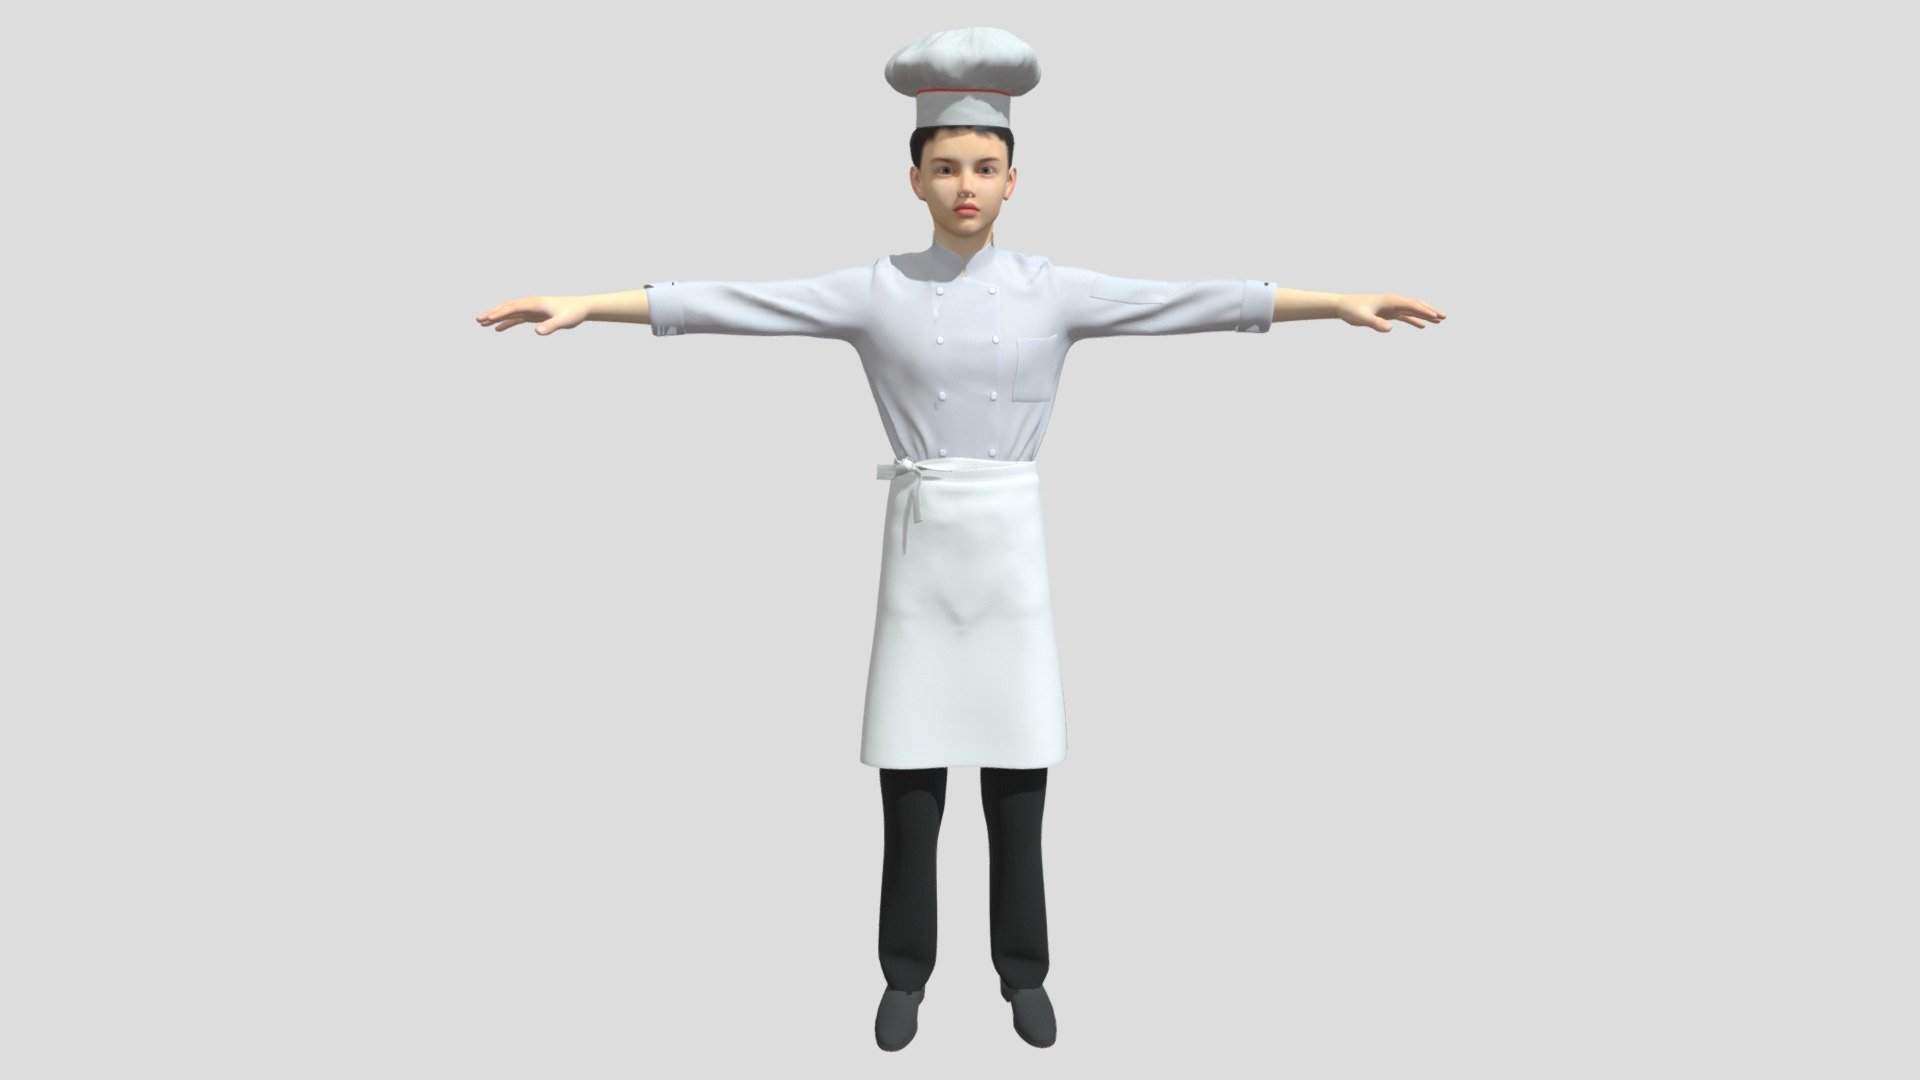 Chef 3D model is a high quality, photo real model that will enhance detail and realism to any of your game projects or commercials. The model has a fully textured, detailed design that allows for close-up renders 3d model